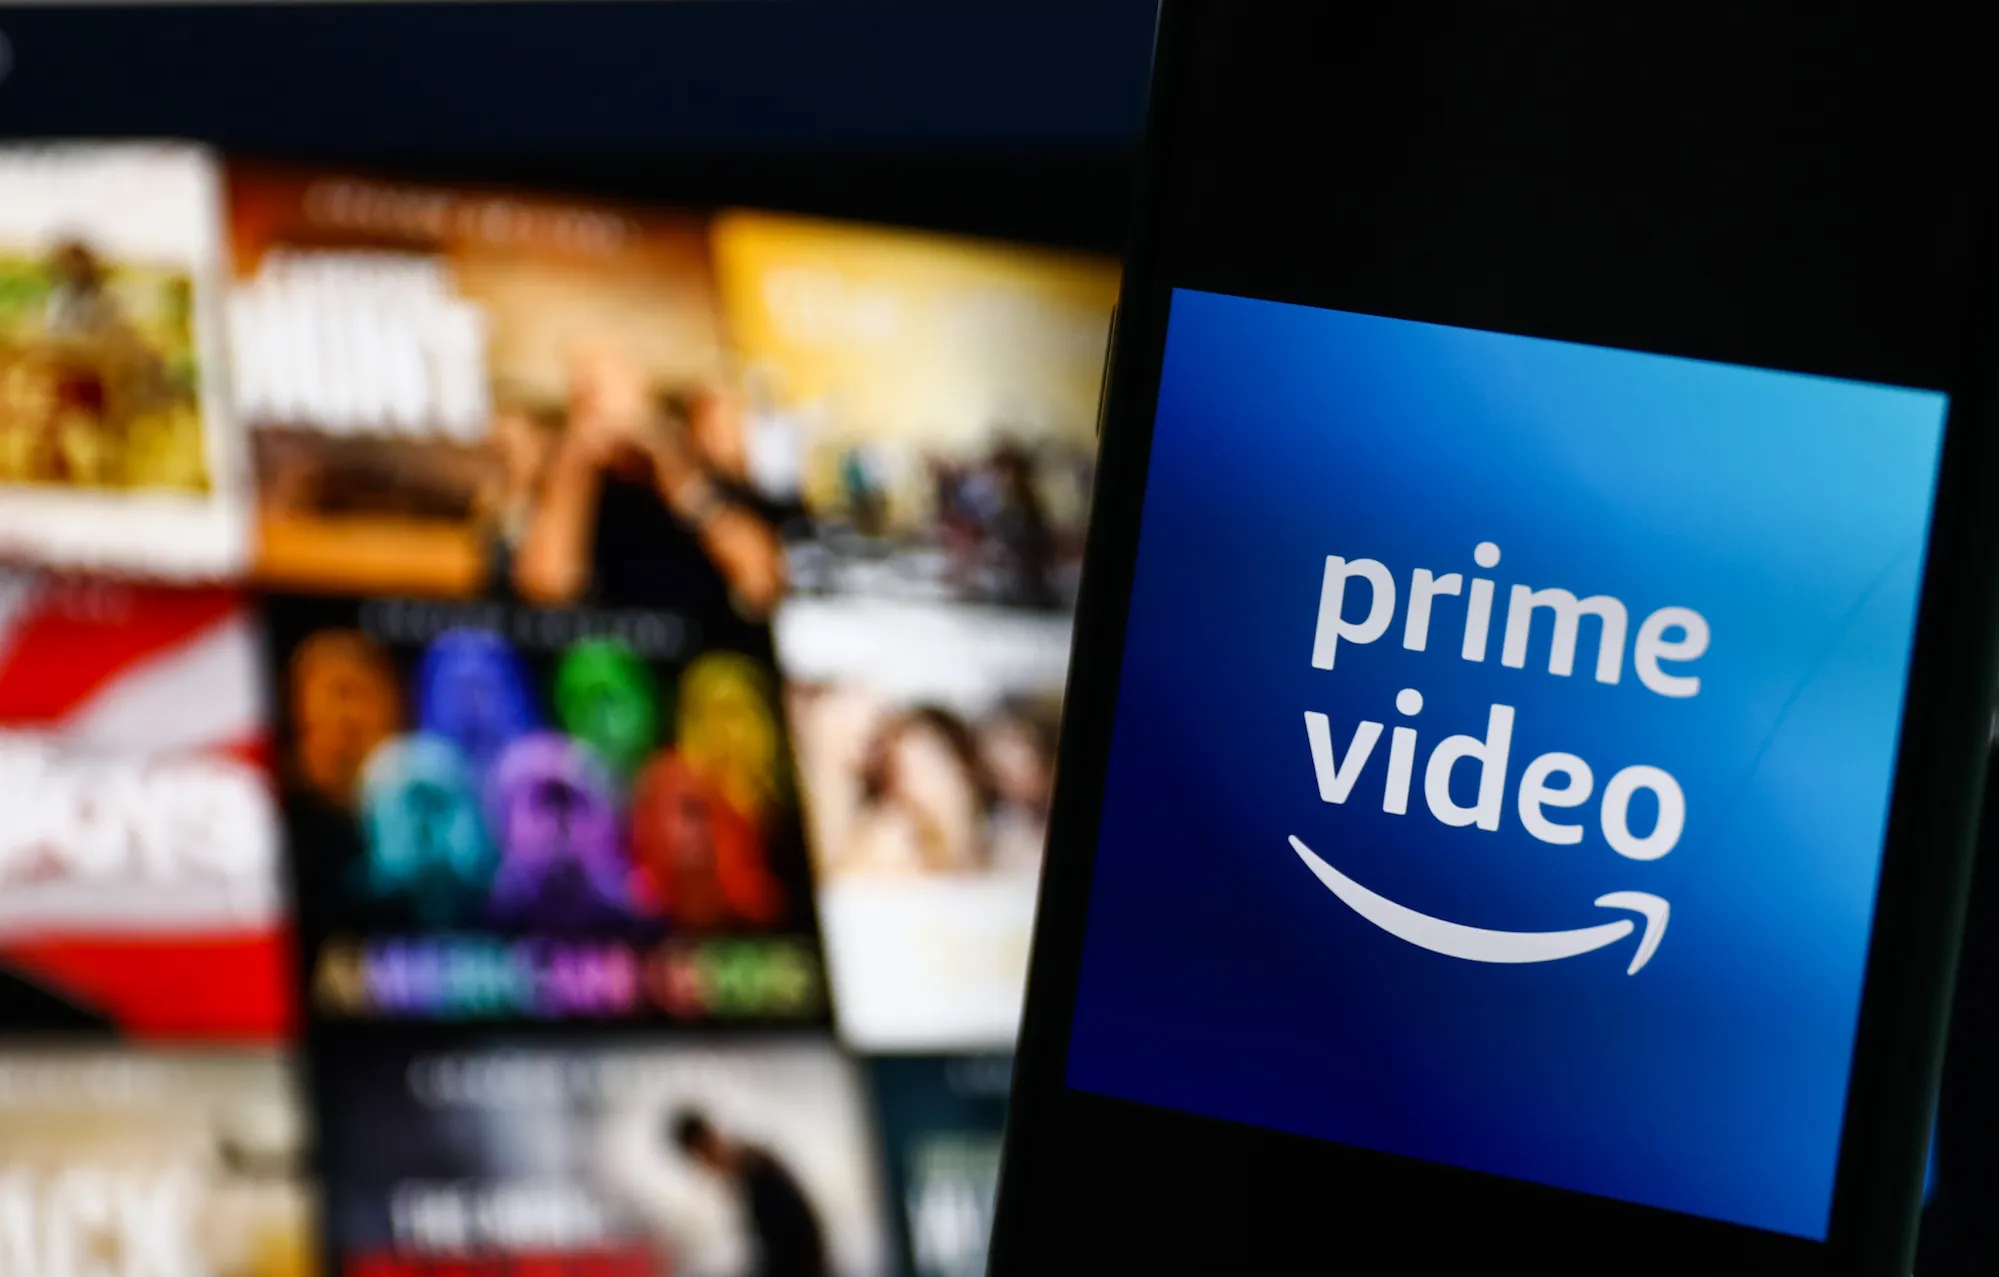 Amazon Shakes Up Streaming New Prime Video Ads Turn TV into a Shopping Hub-